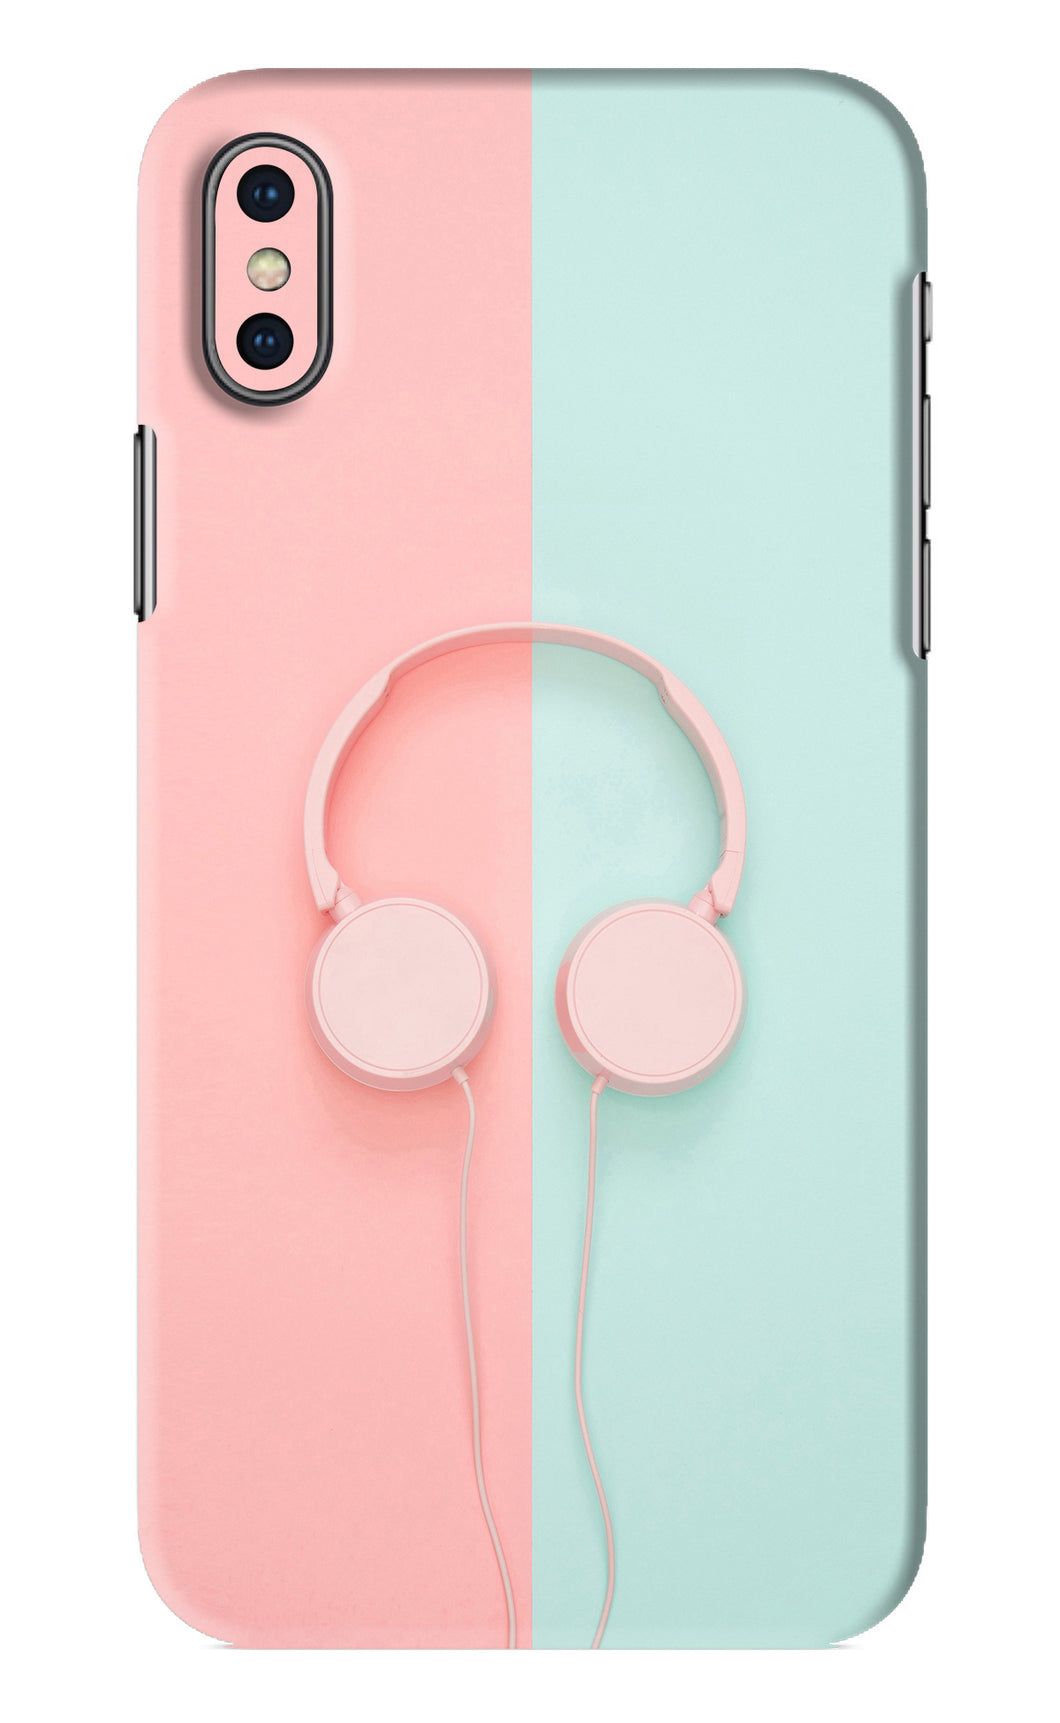 Music Lover iPhone X Back Skin Wrap